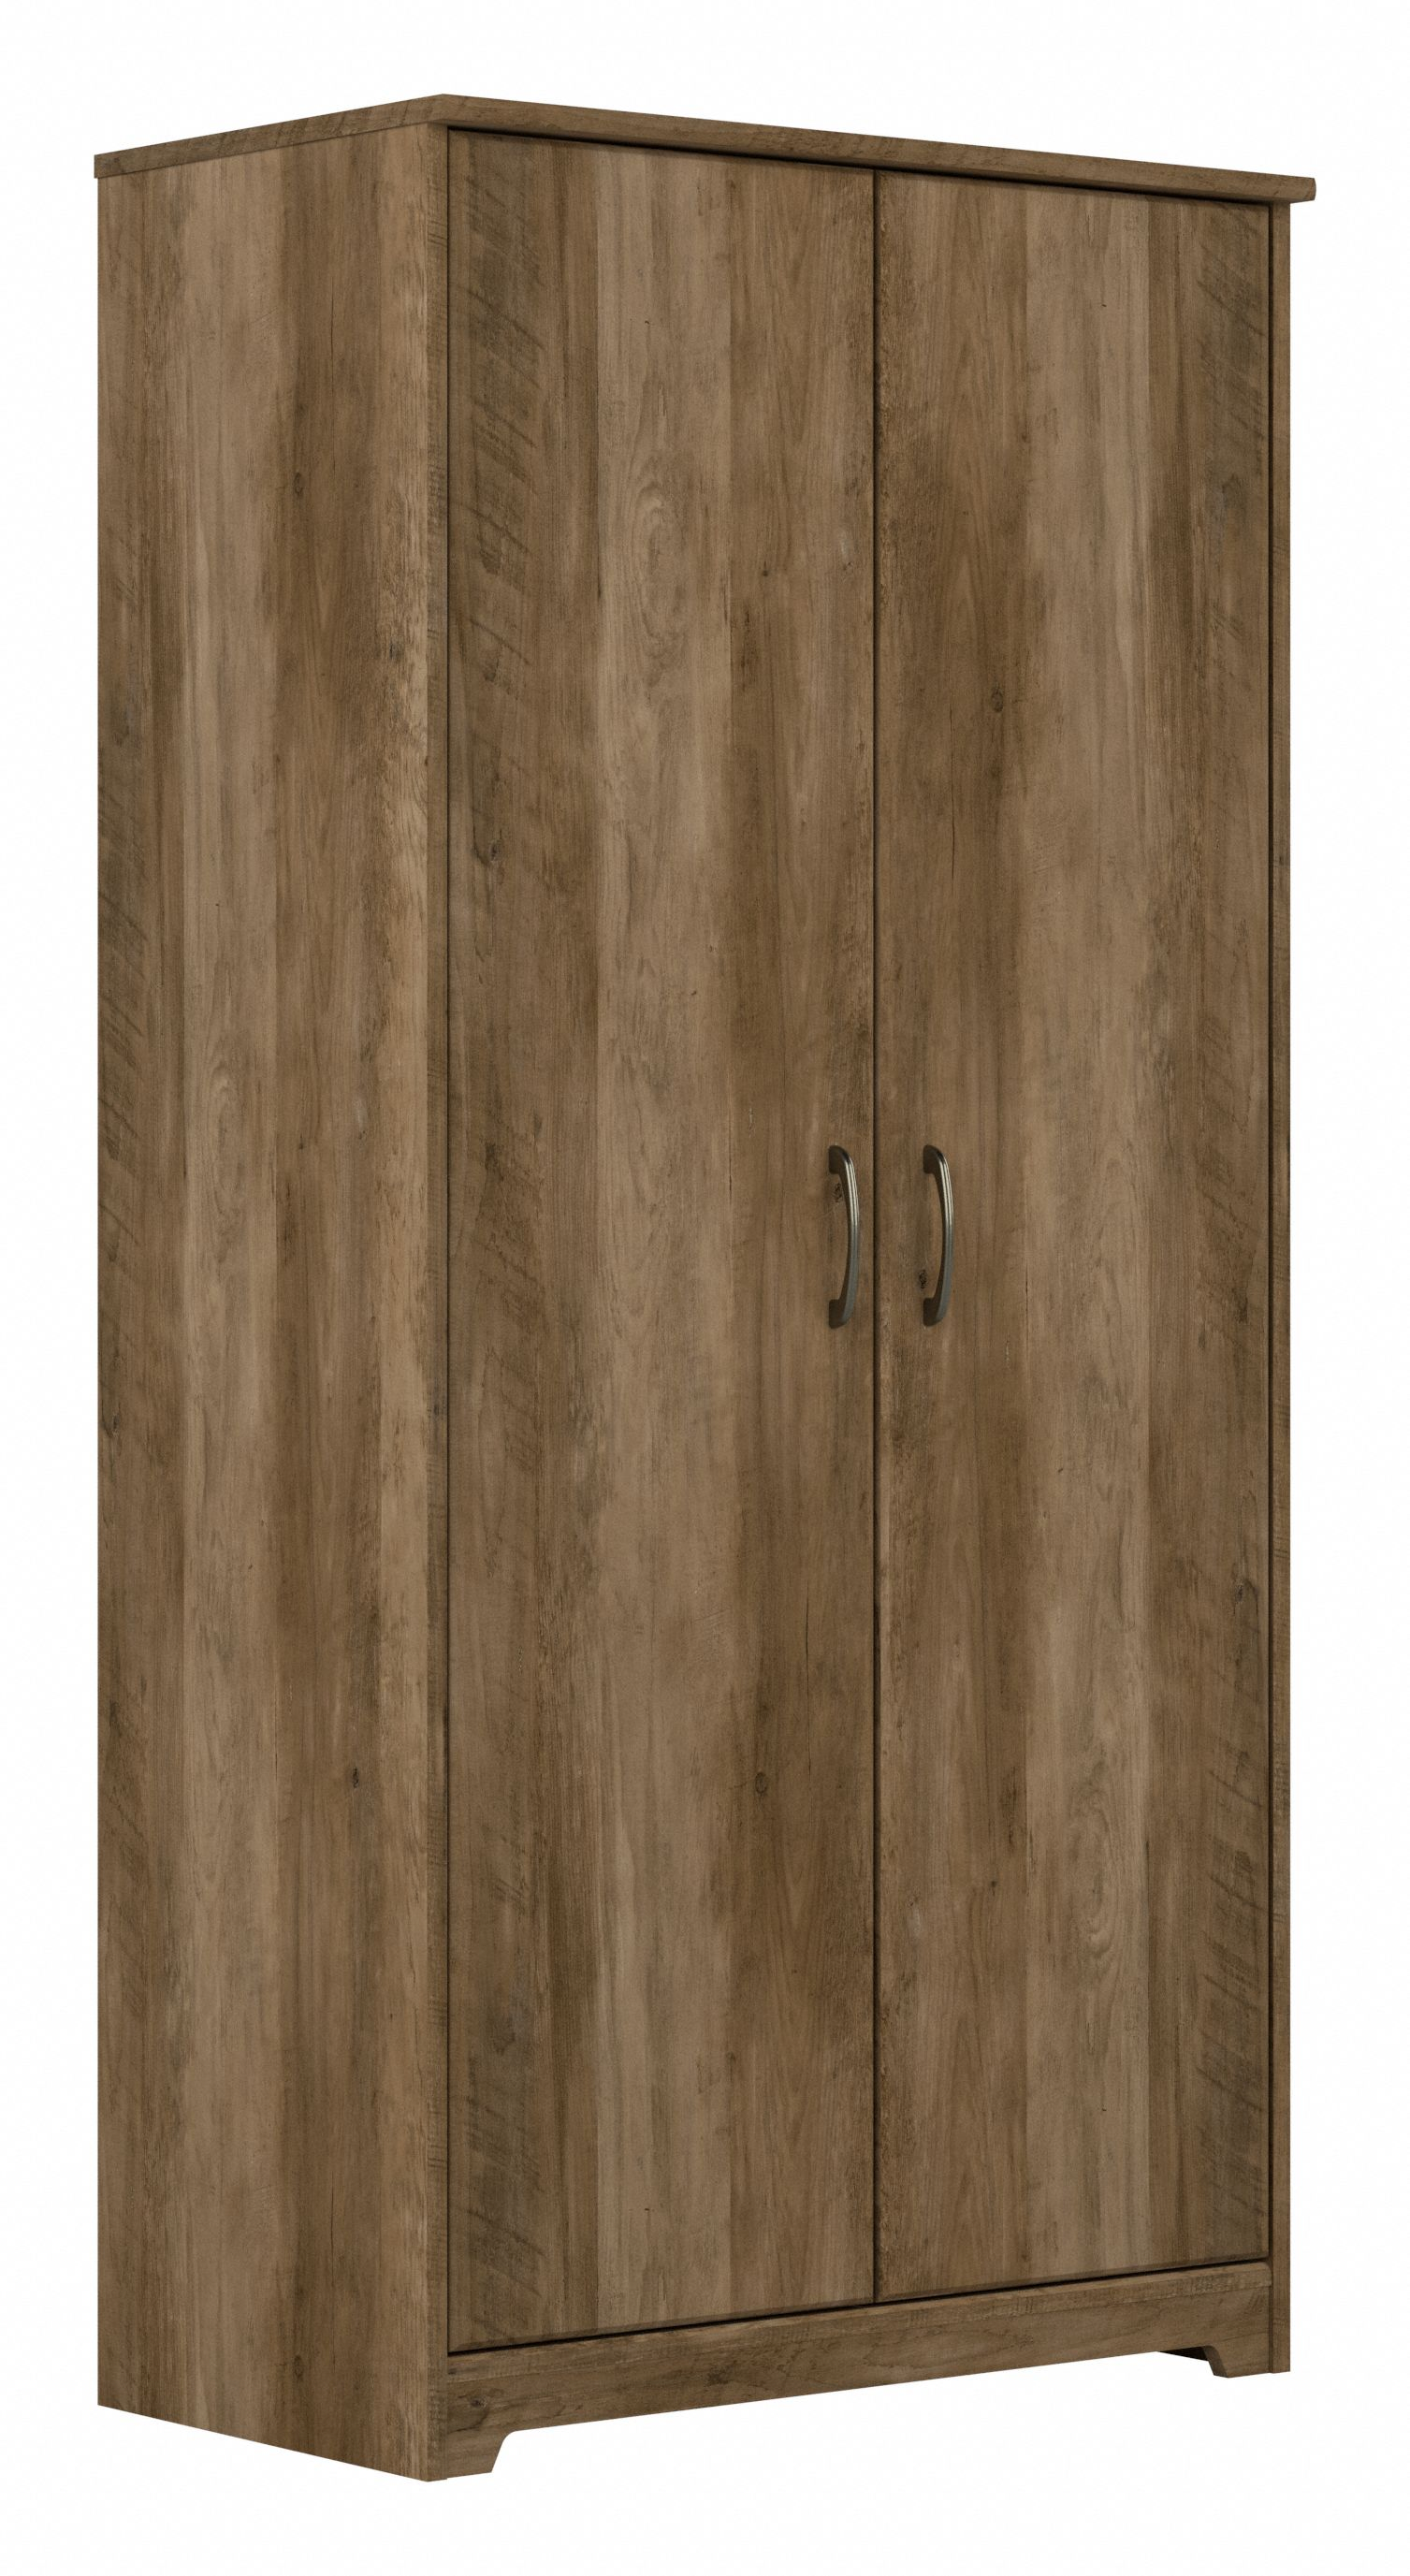 Shop Bush Furniture Cabot Tall Bathroom Storage Cabinet with Doors 02 WC31599-Z1 #color_reclaimed pine